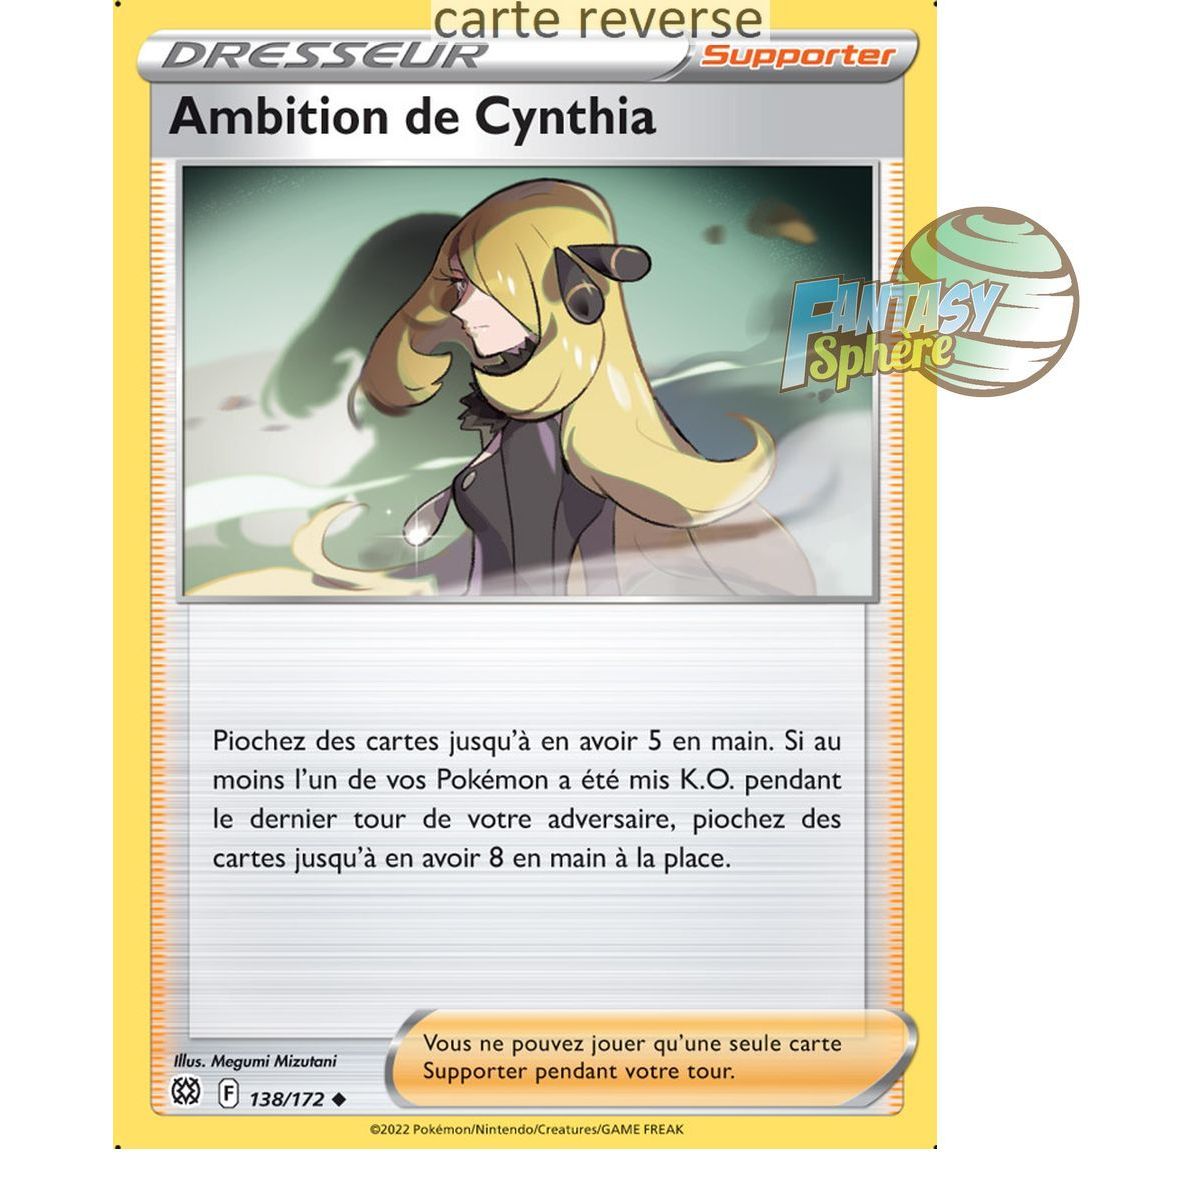 Cynthia's Ambition - Reverse 138/172 - Sword and Shield 9 Sparkling Stars